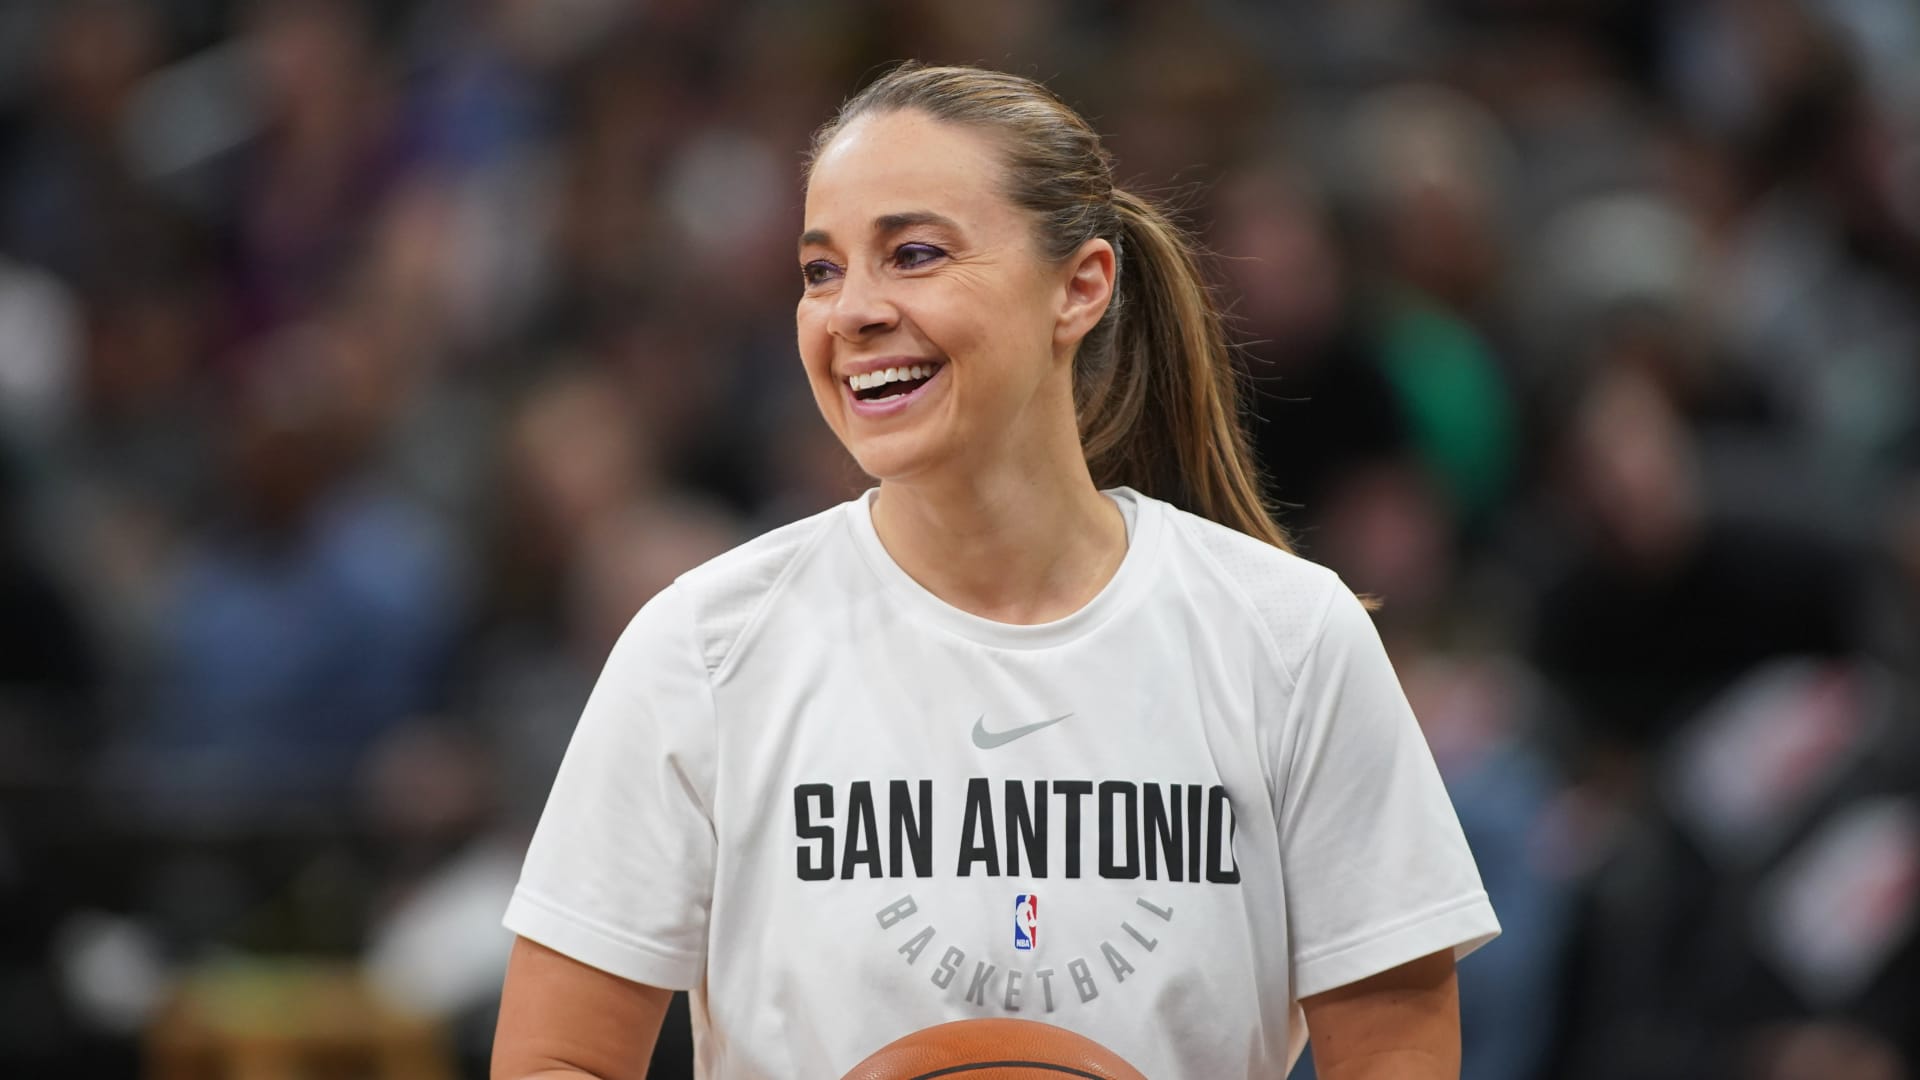 Assistant Coach Becky Hammond warms up with players before the game against the Oklahoma City Thunder on November 17, 2017 at the AT&T Center in San Antonio, Texas.